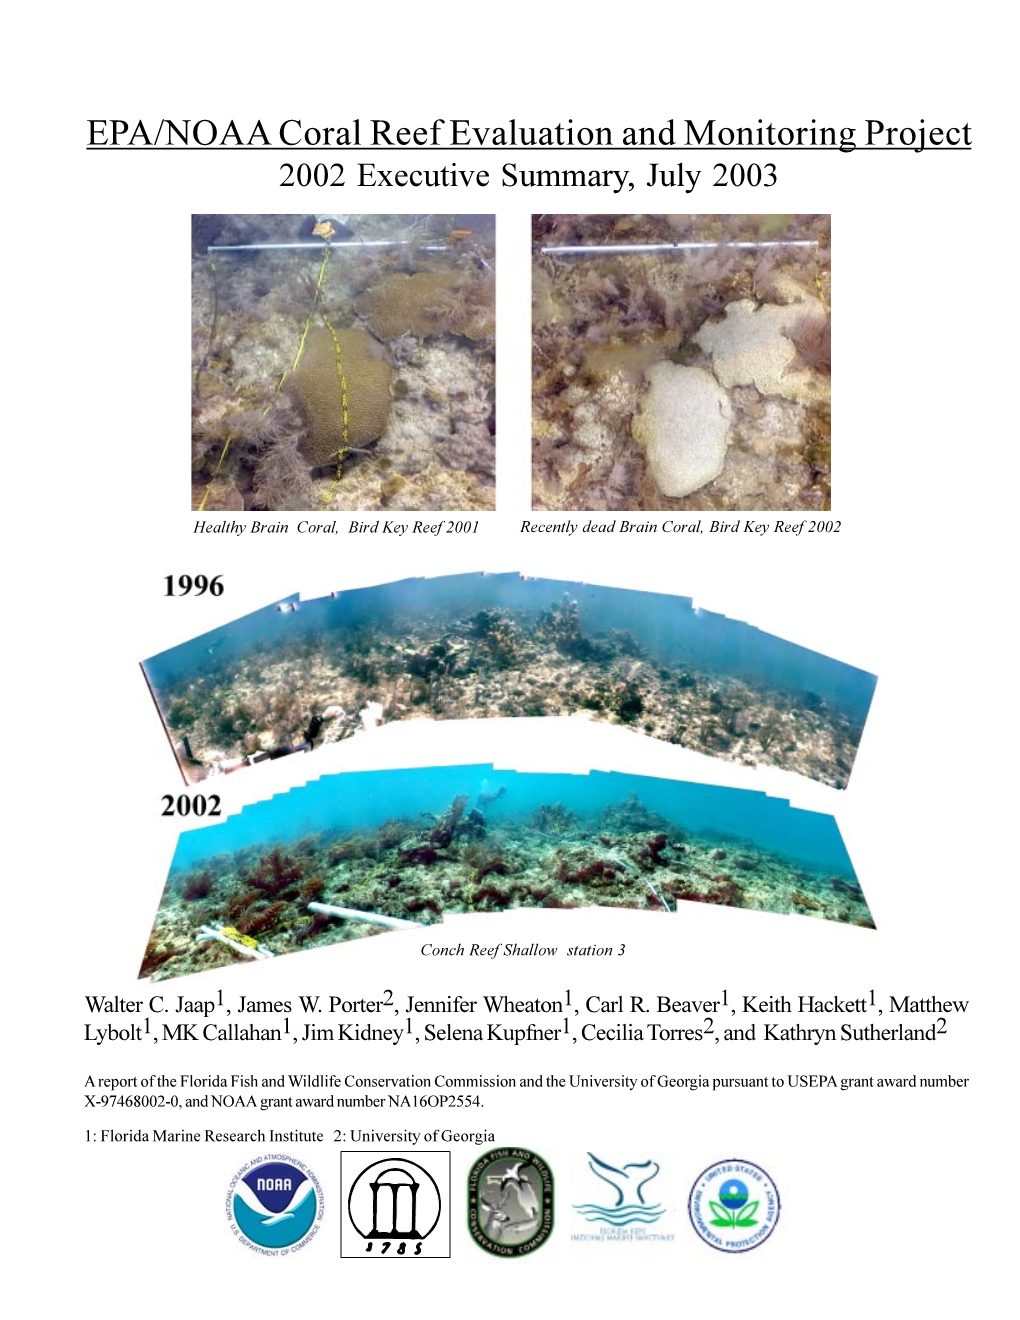 EPA/NOAA Coral Reef Evaluation and Monitoring Project 2002 Executive Summary, July 2003